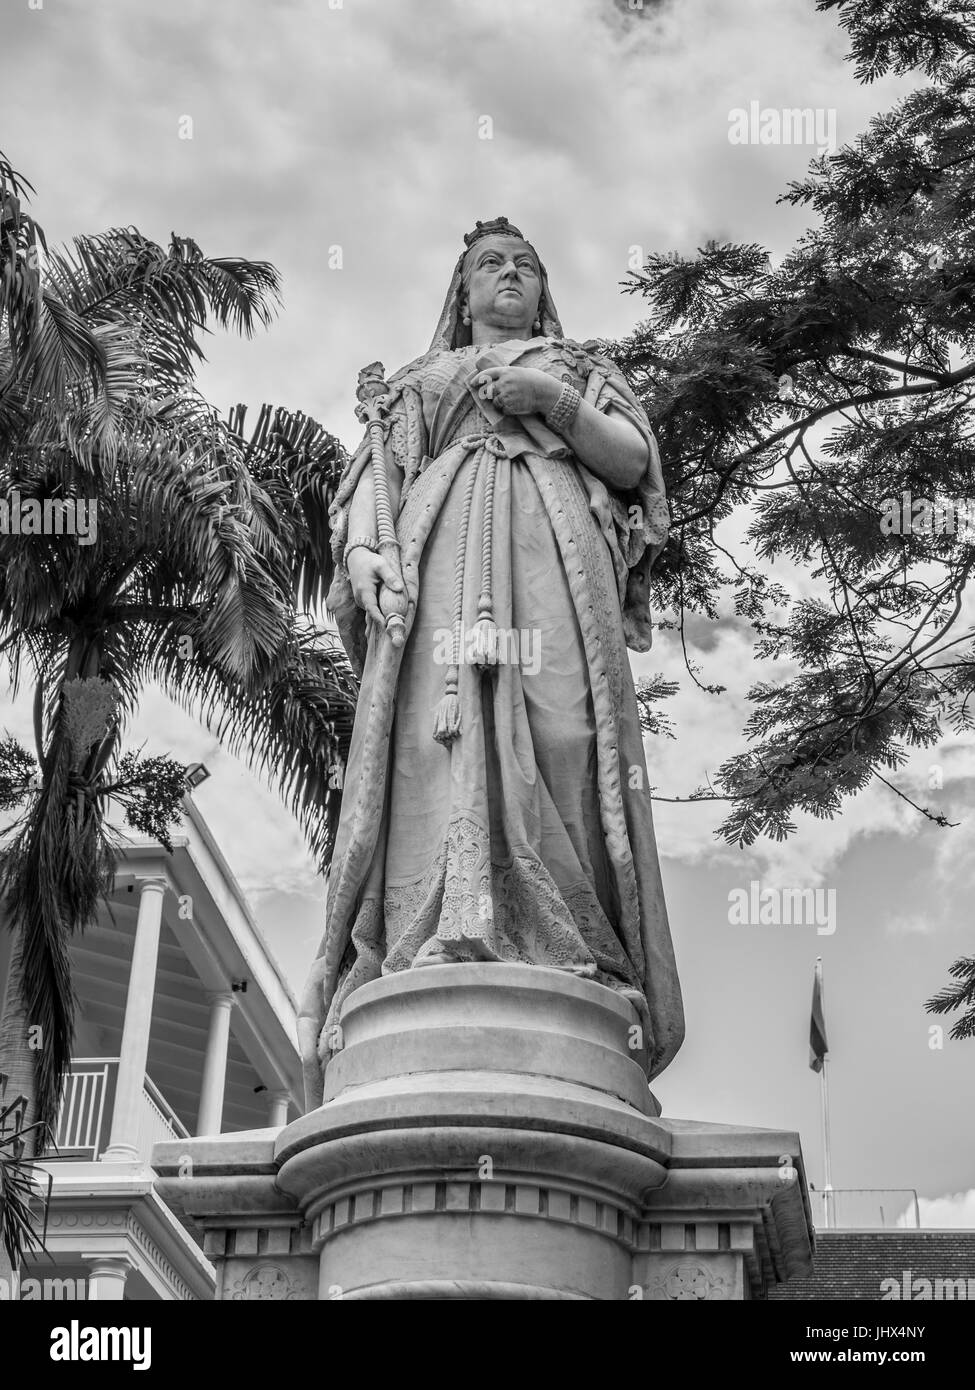 Port Louis, Mauritius - December 25, 2015: Statue of Queen Victoria, Government House in Port Louis, Mauritius. Black and white photography. Stock Photo